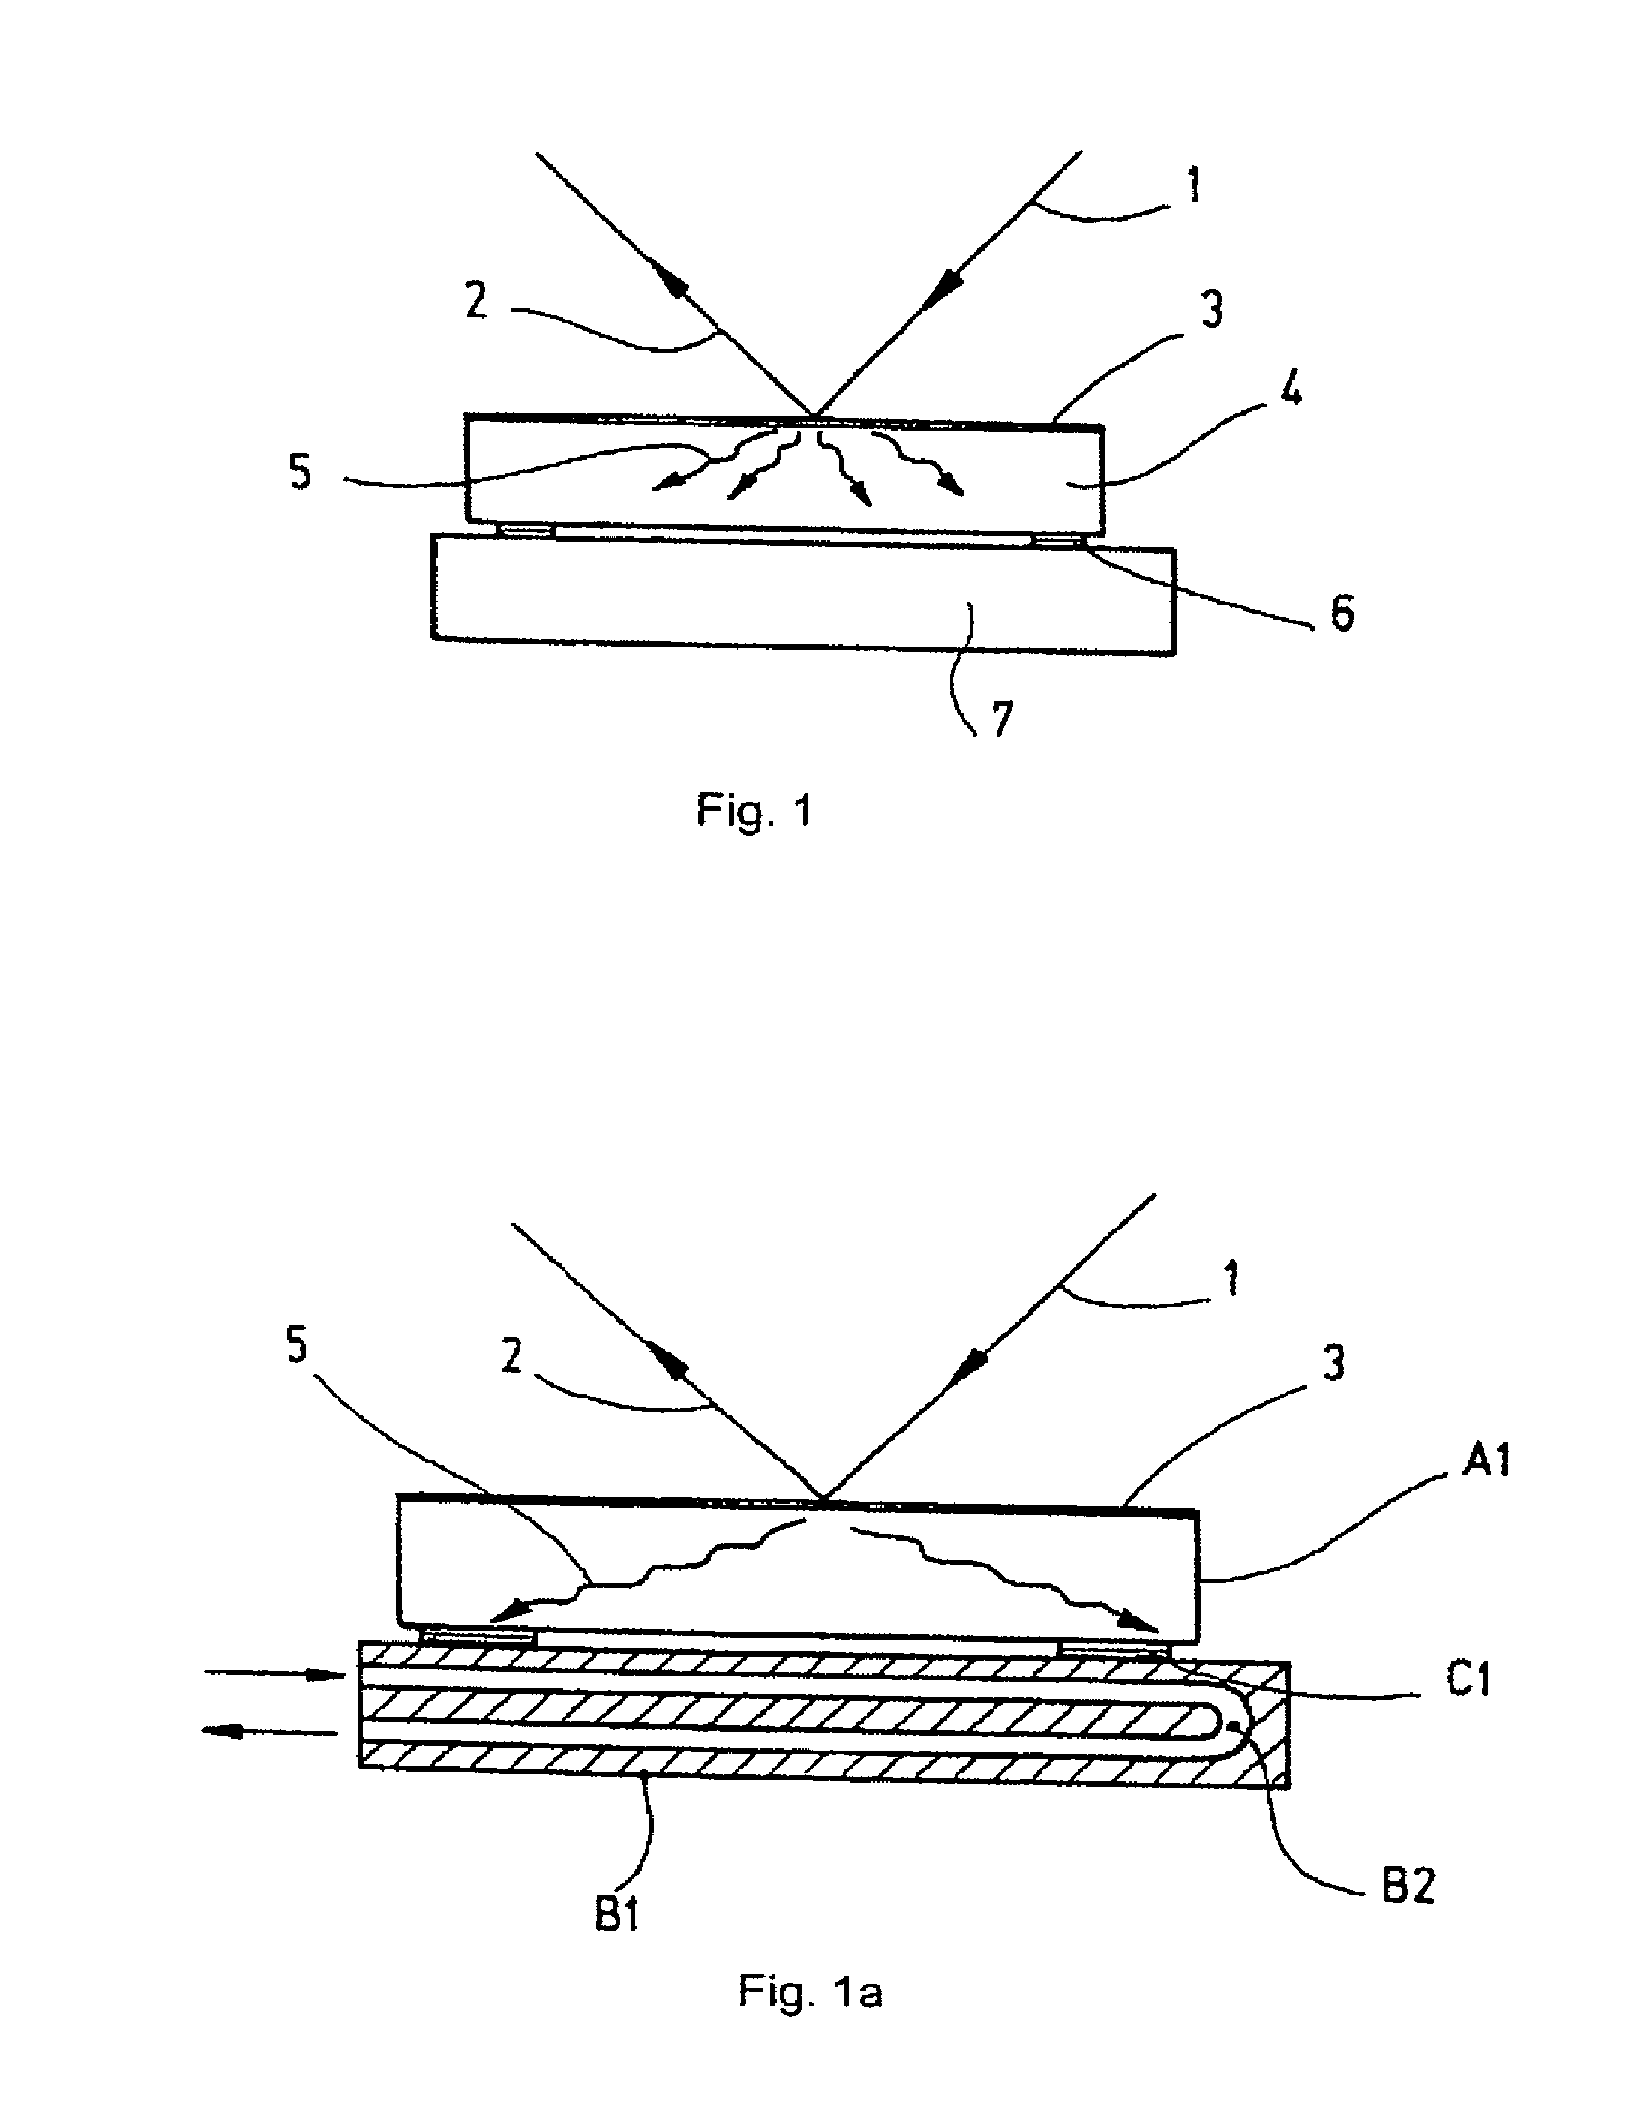 Optical Component Having an Improved Transient Thermal Behavior and Method for Improving the Transient Thermal Behavior of an Optical Component